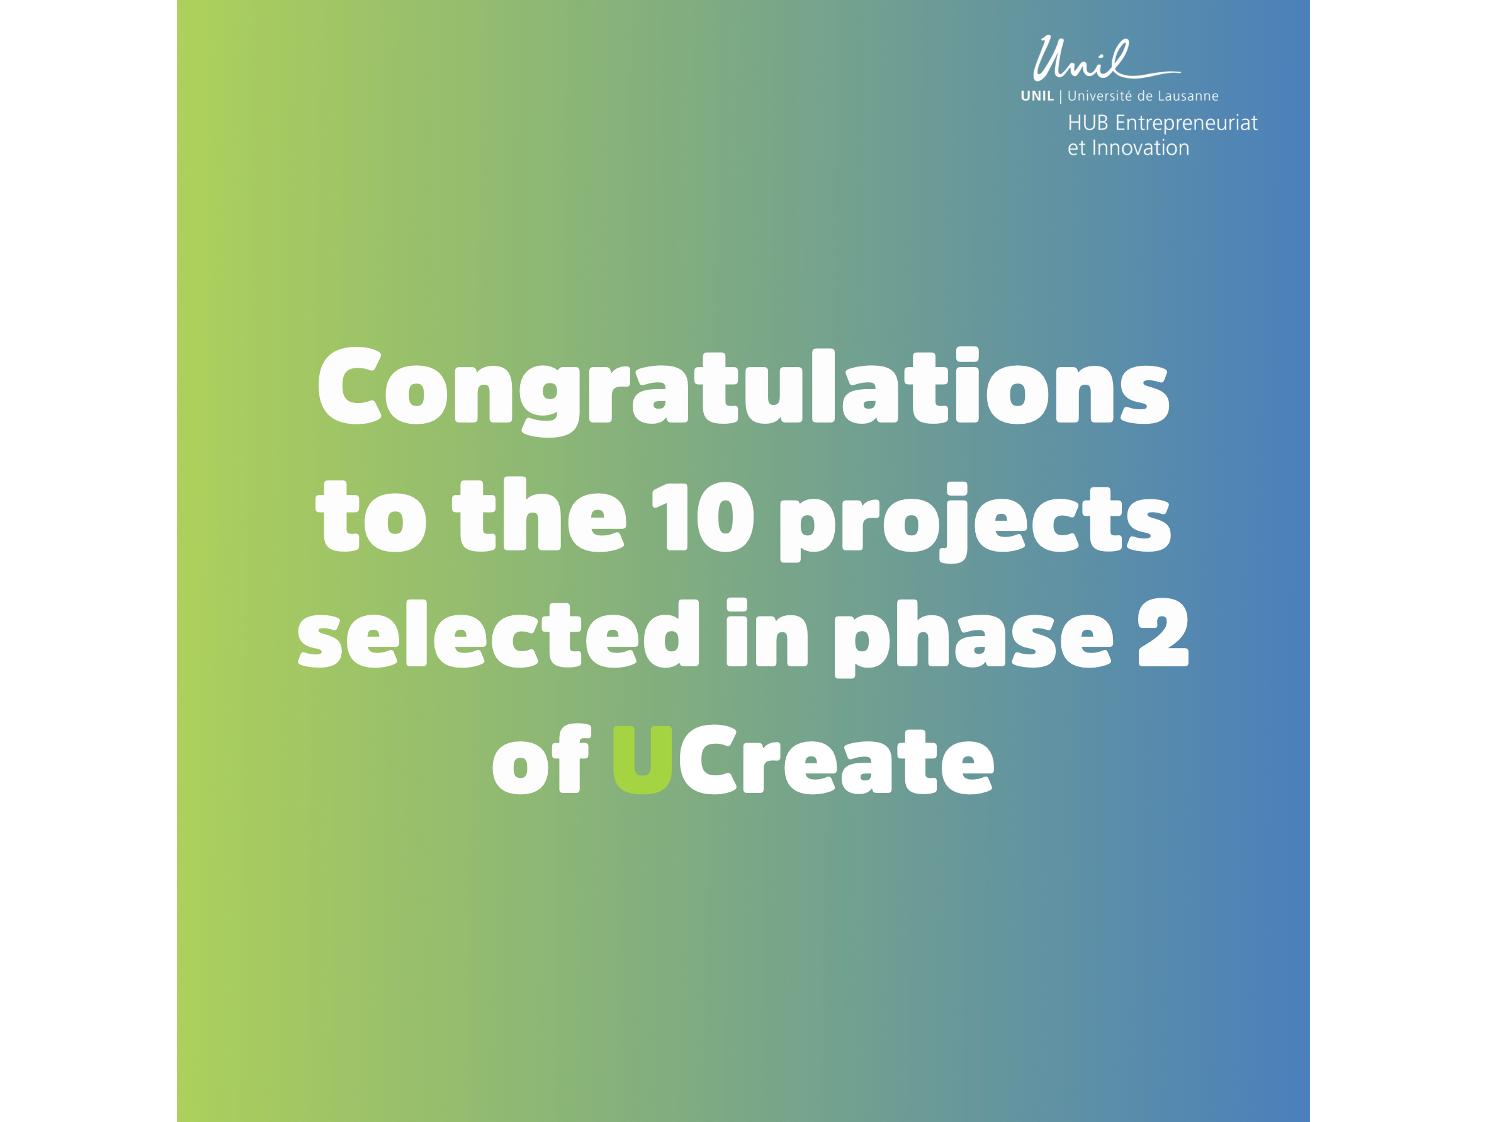 Discover the 10 projects selected for phase 2 of our UCreate program